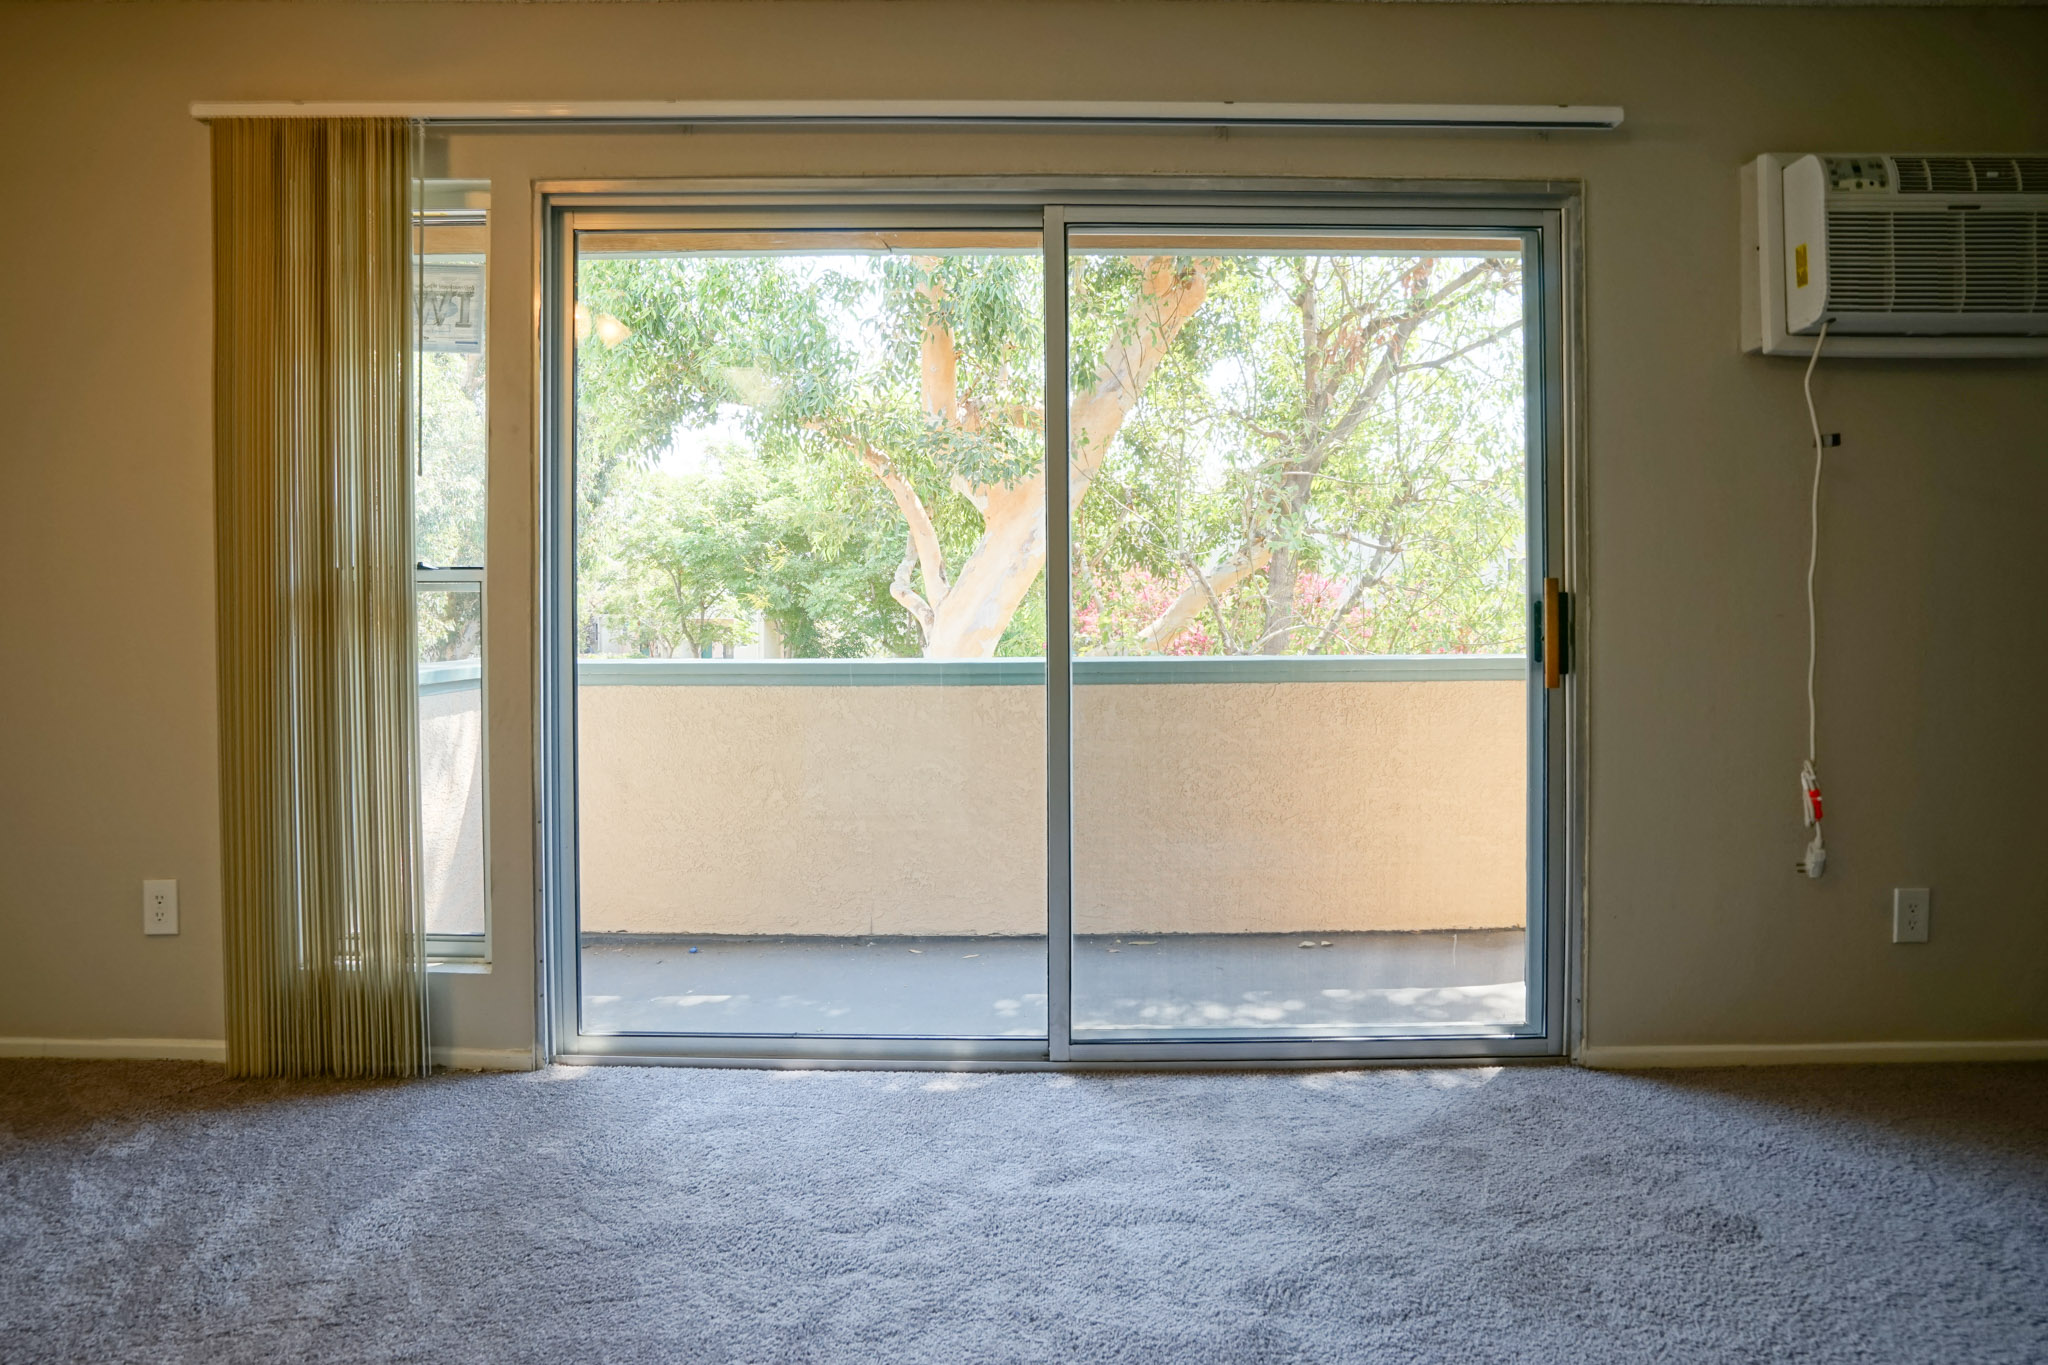 View of a glass sliding door that leads to a balcony. Door has vertical blinds, and there is an air conditioner mounted on the wall next to it. View outside the balcony is a tree from this angle.